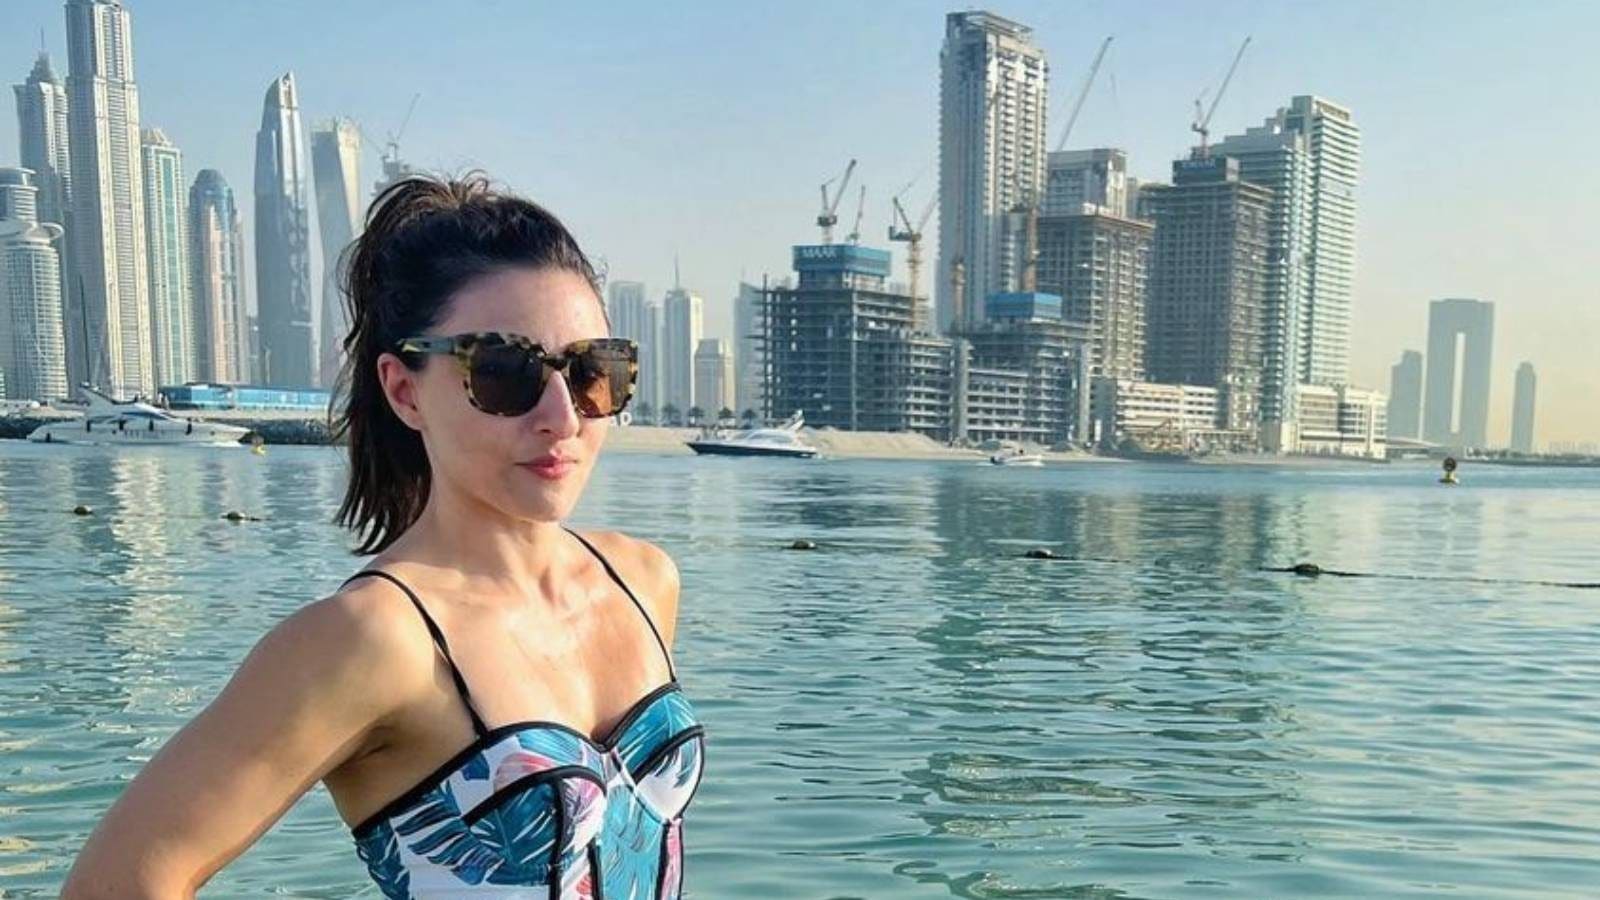 Soha Ali Khan Gives Fitness Goals by Doing a Full Body Workout Using Dumbbells